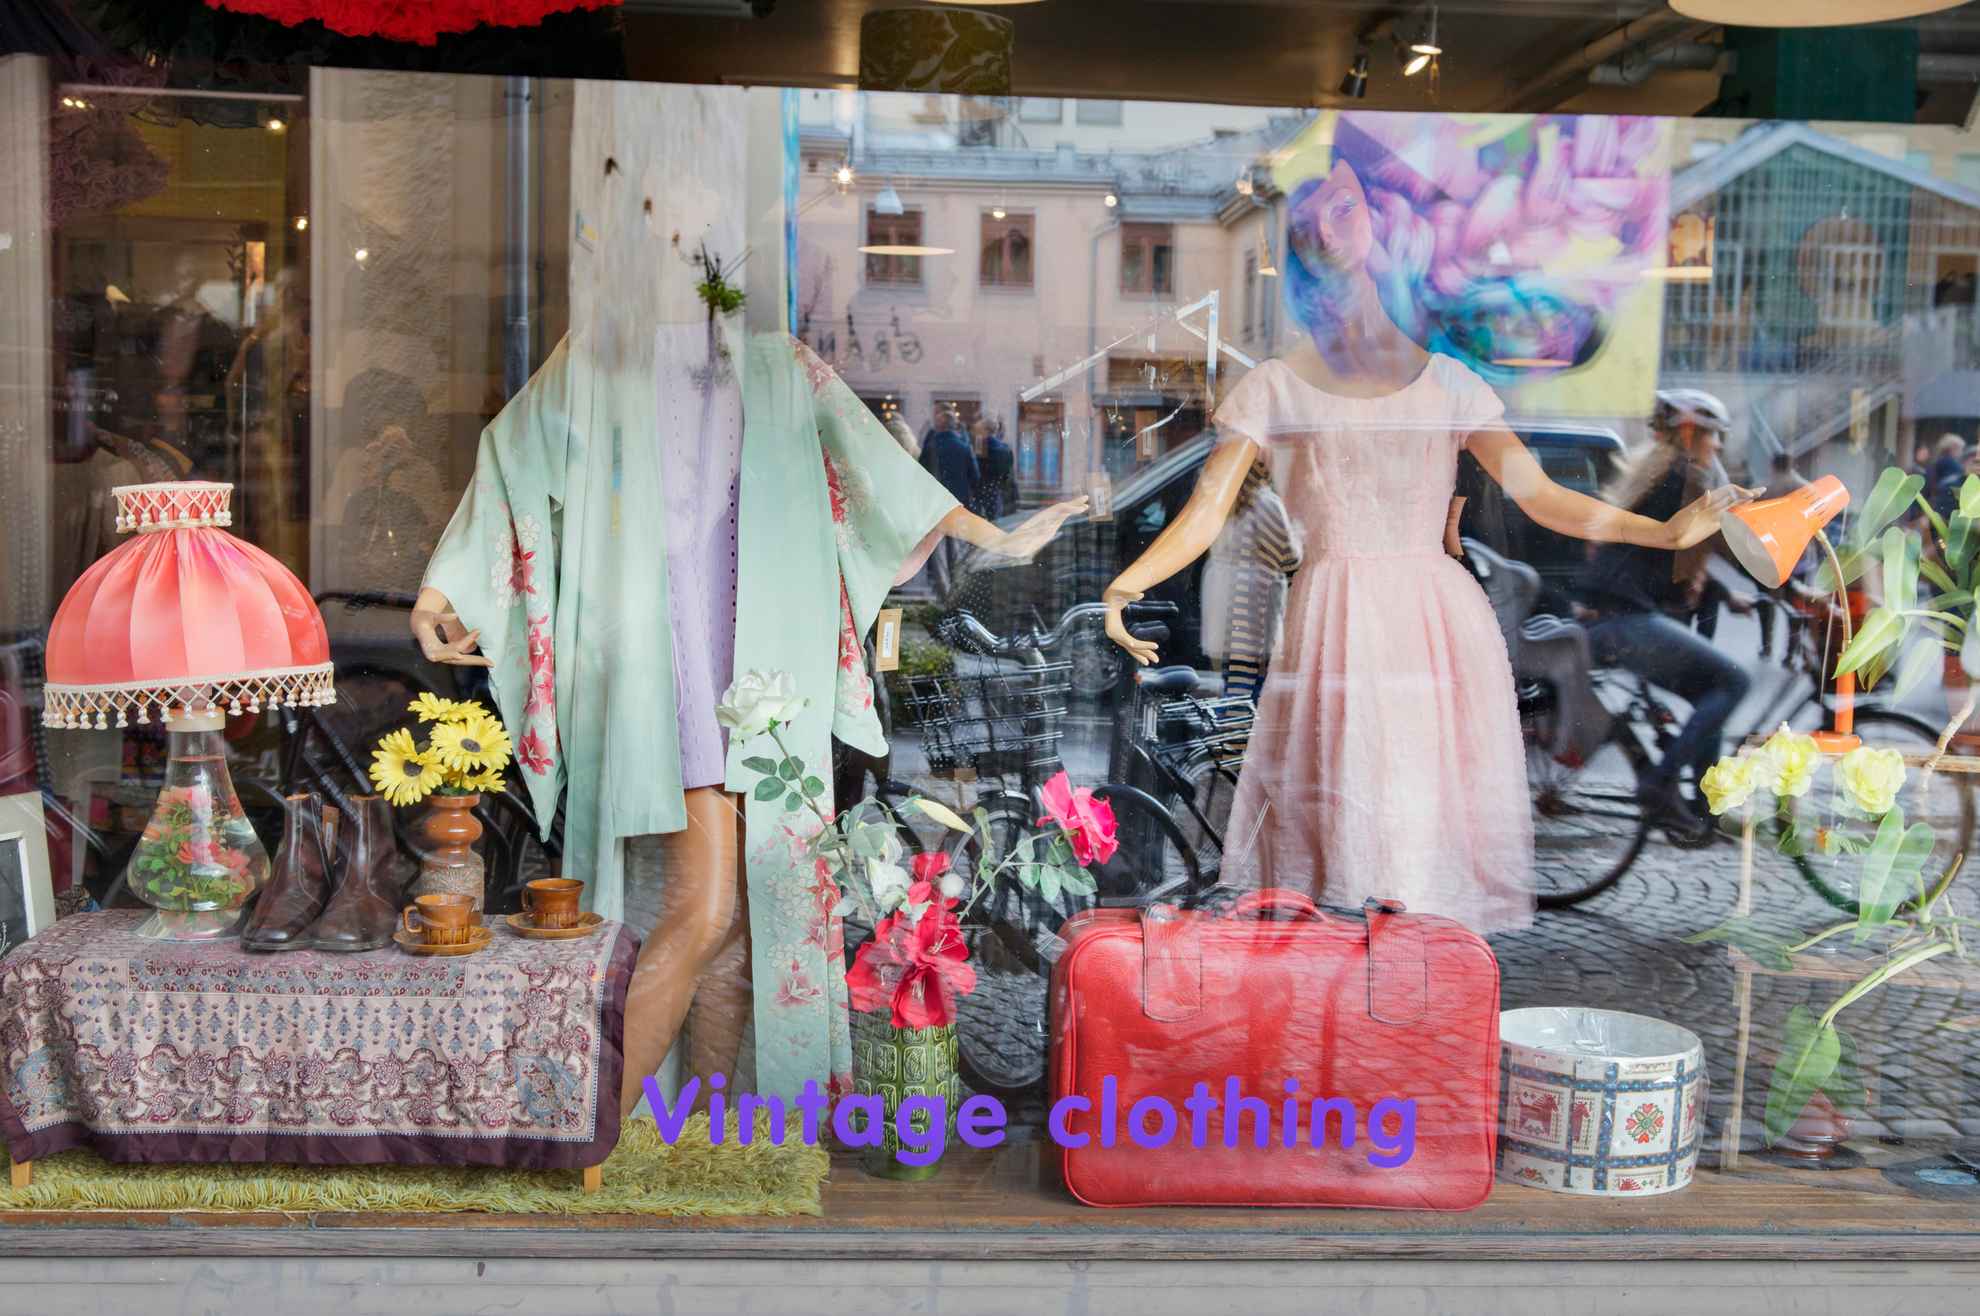 A shop window with vintage clothing. You can see reflections in the window of people moving.